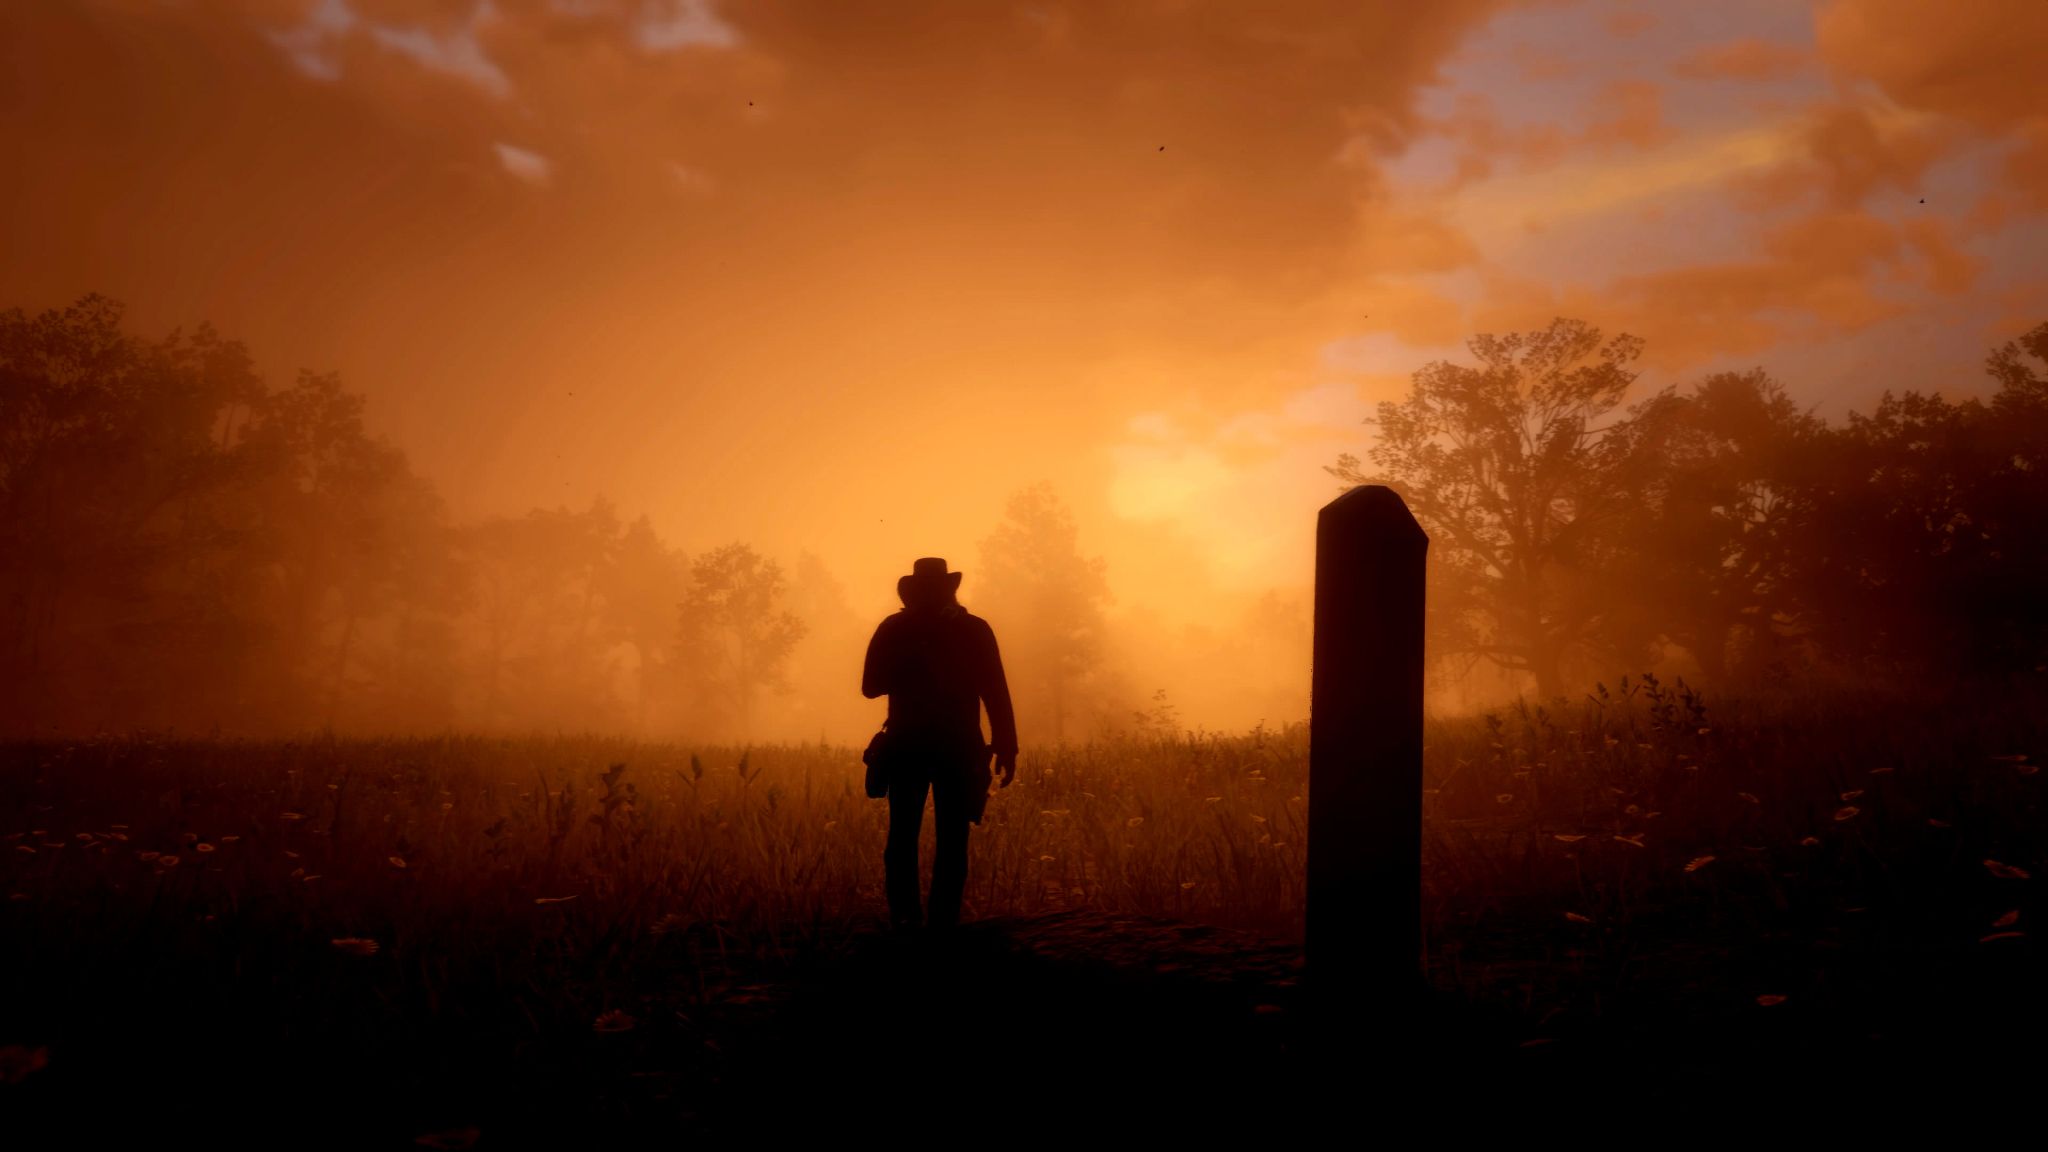 Game Red Dead Redemption 2 2048x1152 Resolution Wallpaper, HD Games 4K Wallpaper, Image, Photo and Background